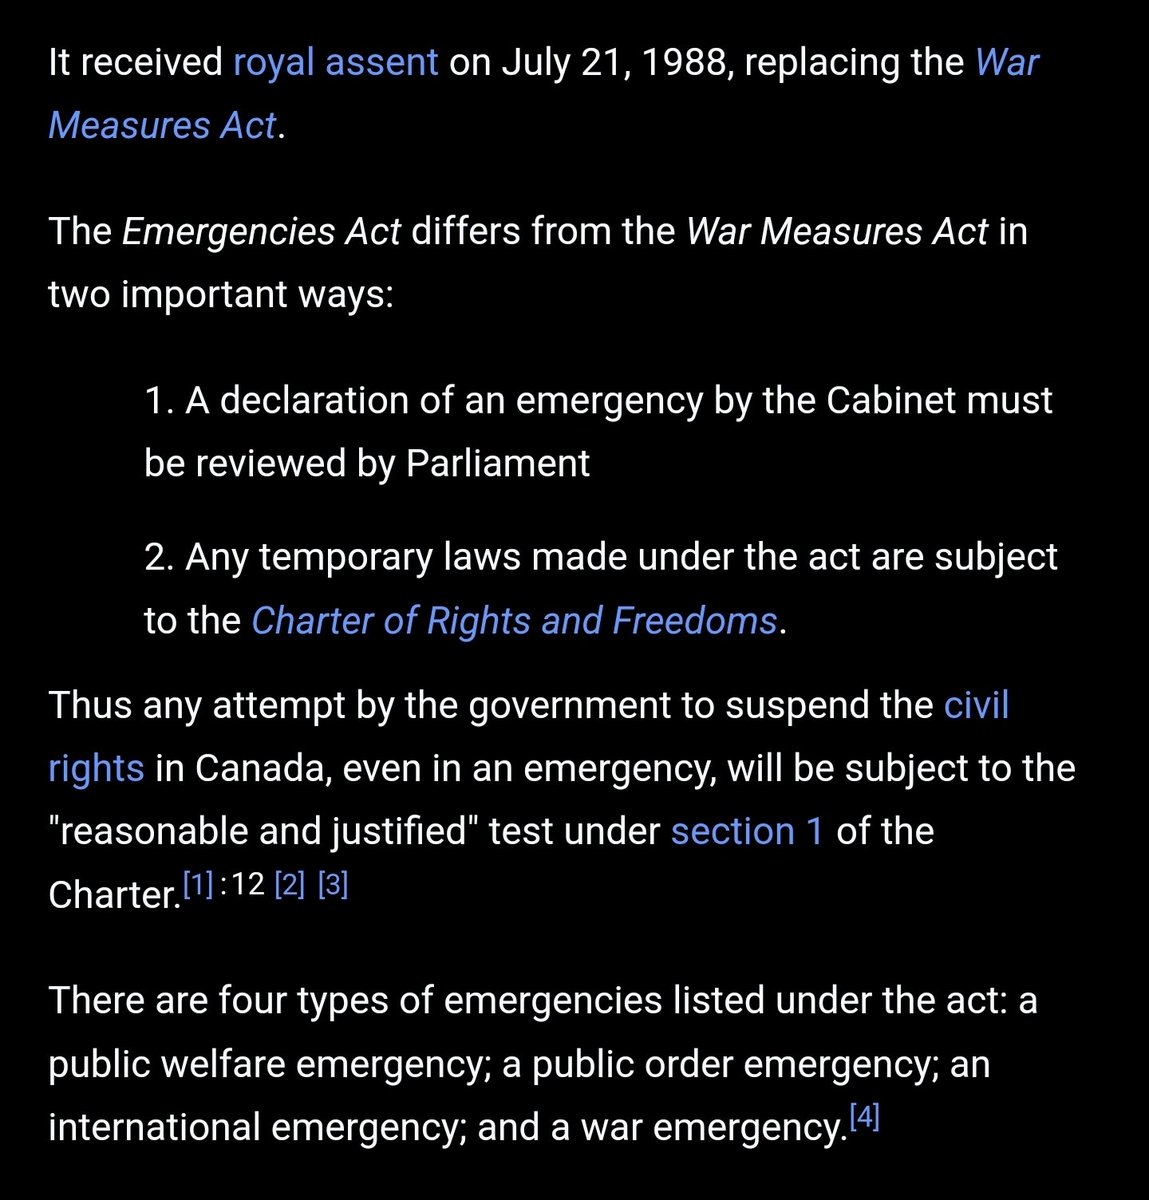 @freewheel33 @ThreeTurtles @ItsDeanBlundell That's not a very polite response, especially against people who were likely alive before 1988.  The War Measures Act was replaced by the Emergencies Act which has the same powers with better limitations and oversight.